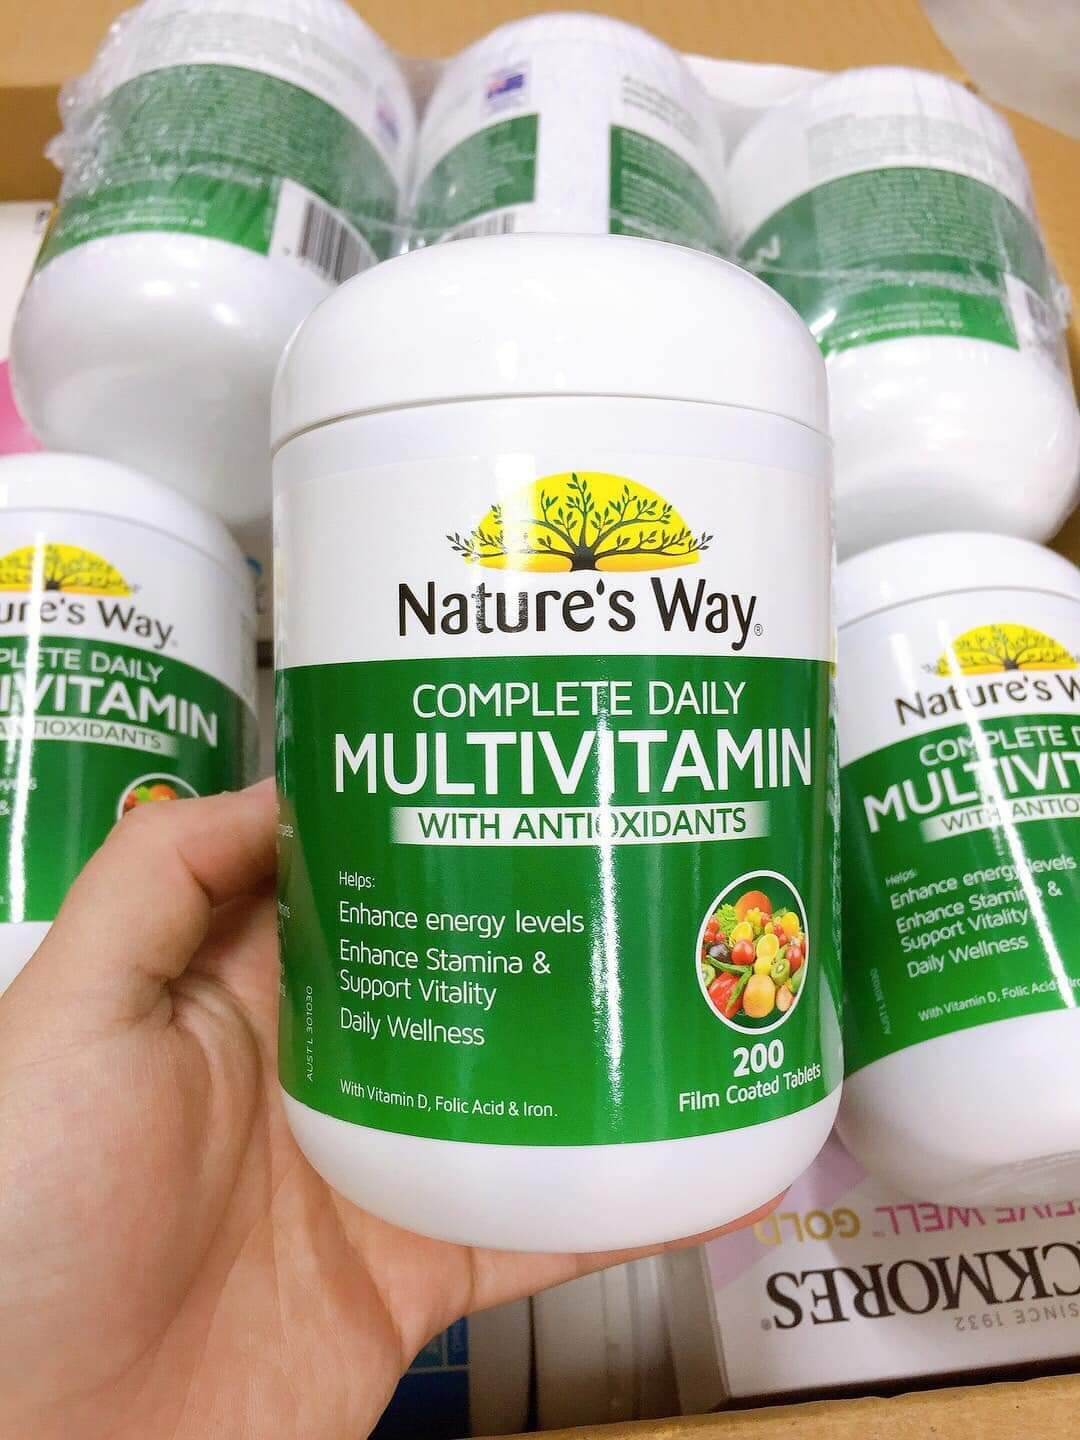 Vitamin tổng hợp (tảo biển) Nature's Way Complete daily Multivitamin